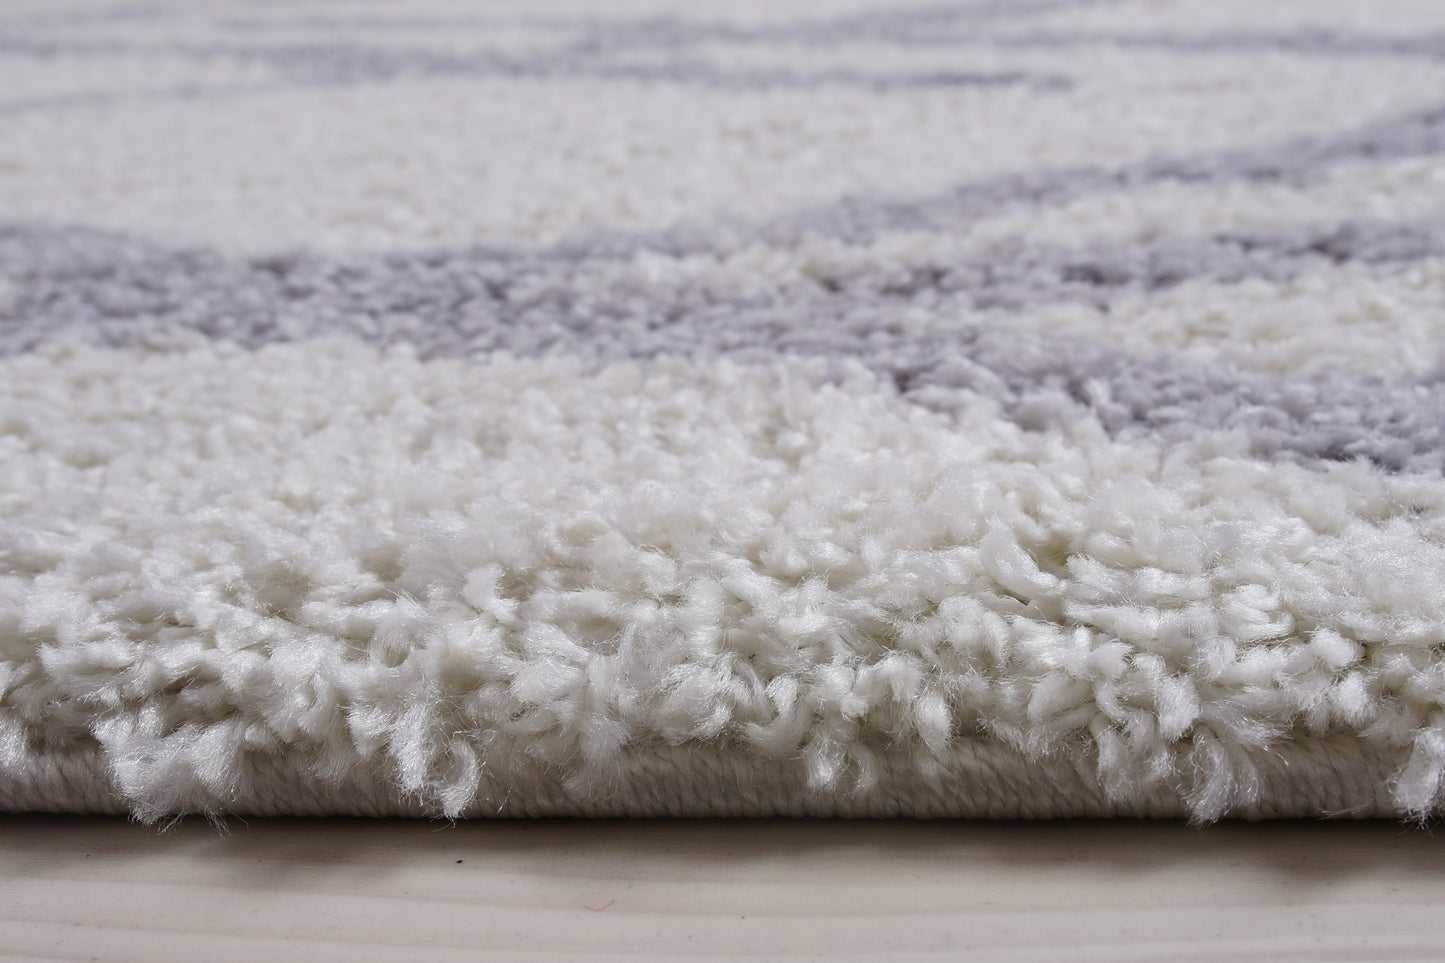 ladole rugs shaggy tangier turkish smooth soft made by machine indoor small mat doormat rug in white light gray 110 x 211 57cm x 90cm 5x7, 5x8 ft Contemporary, Living Room Carpet, Bedroom, Home Office